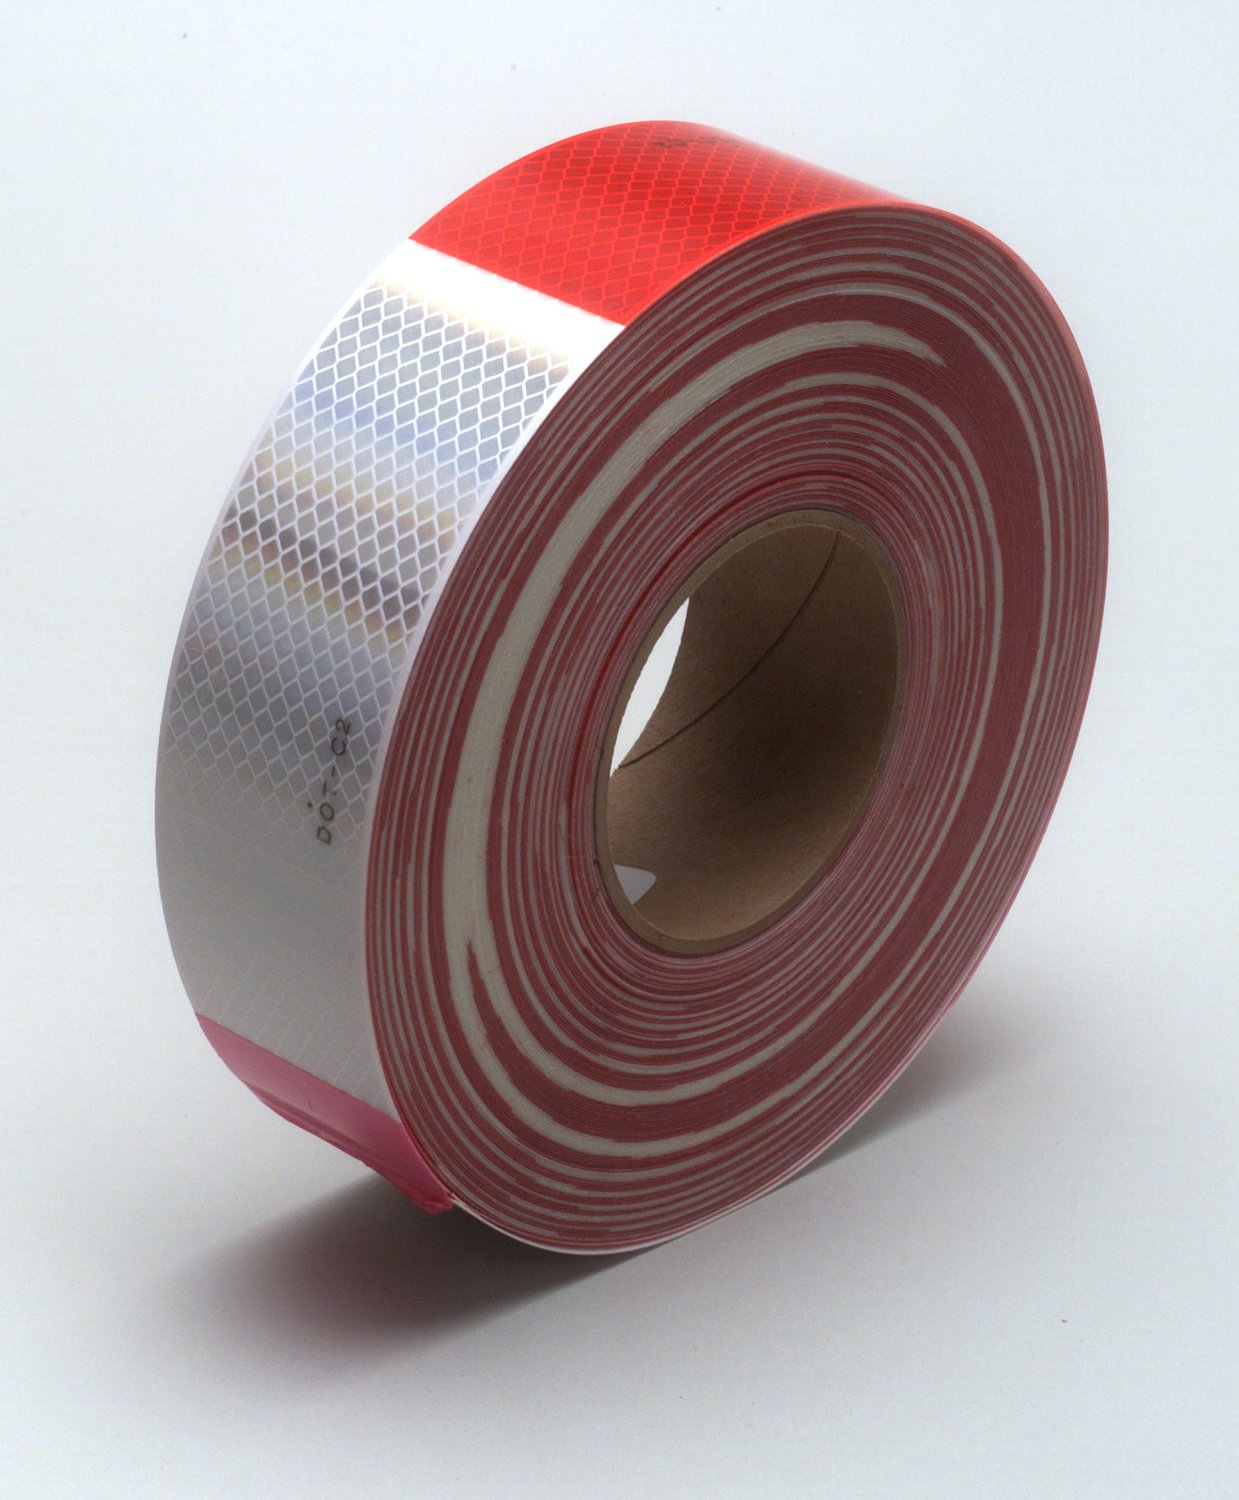 7000030833 - 3M Diamond Grade Conspicuity Markings 983-32, Red/White, 67533, 2 in x
150 ft